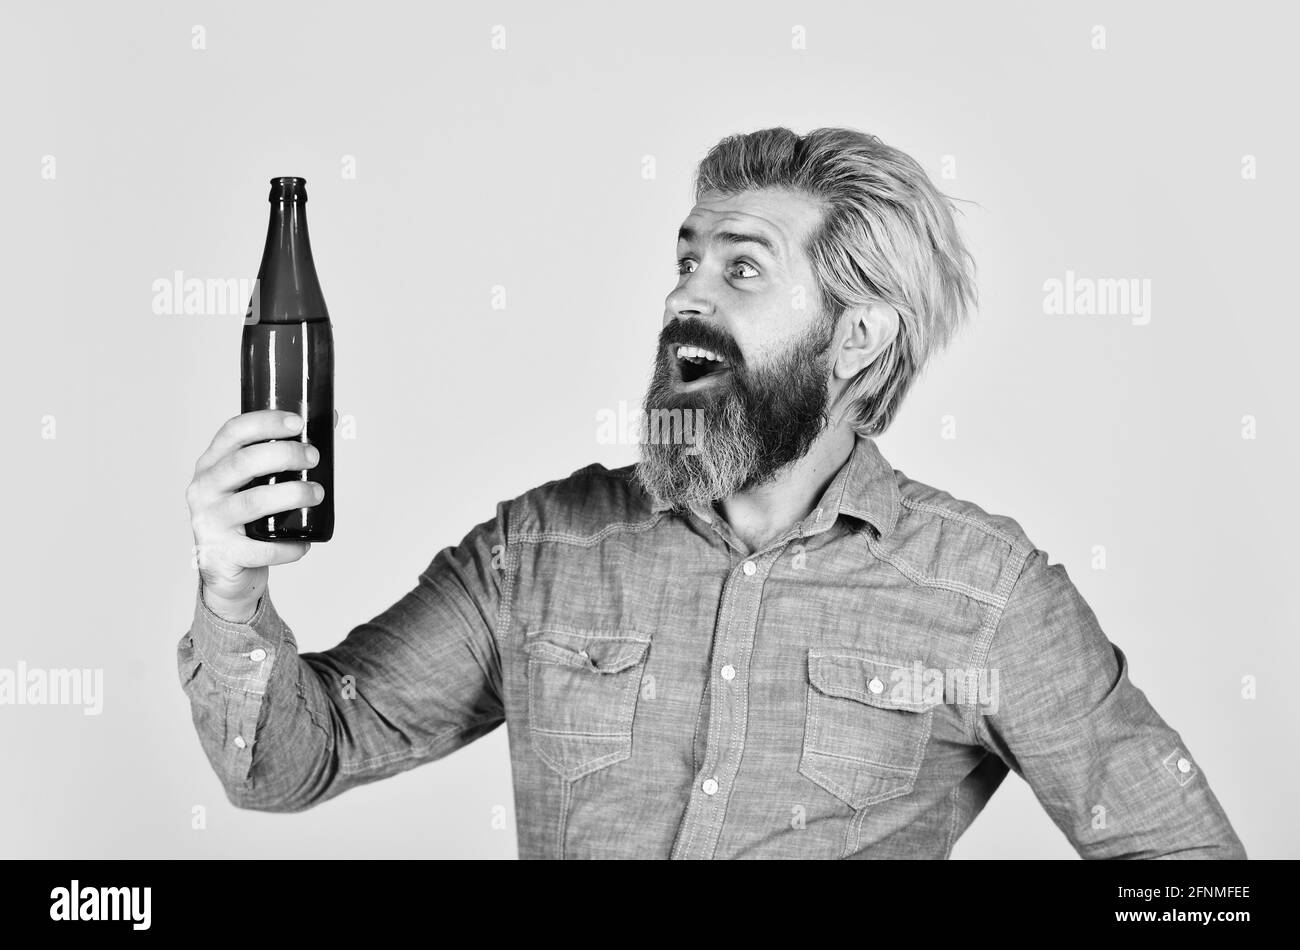 clear pour water in bottle. Party with friends. Brutal bearded man drink beer from bottle. Friends leisure lifestyle concept. stylish handsome man Stock Photo